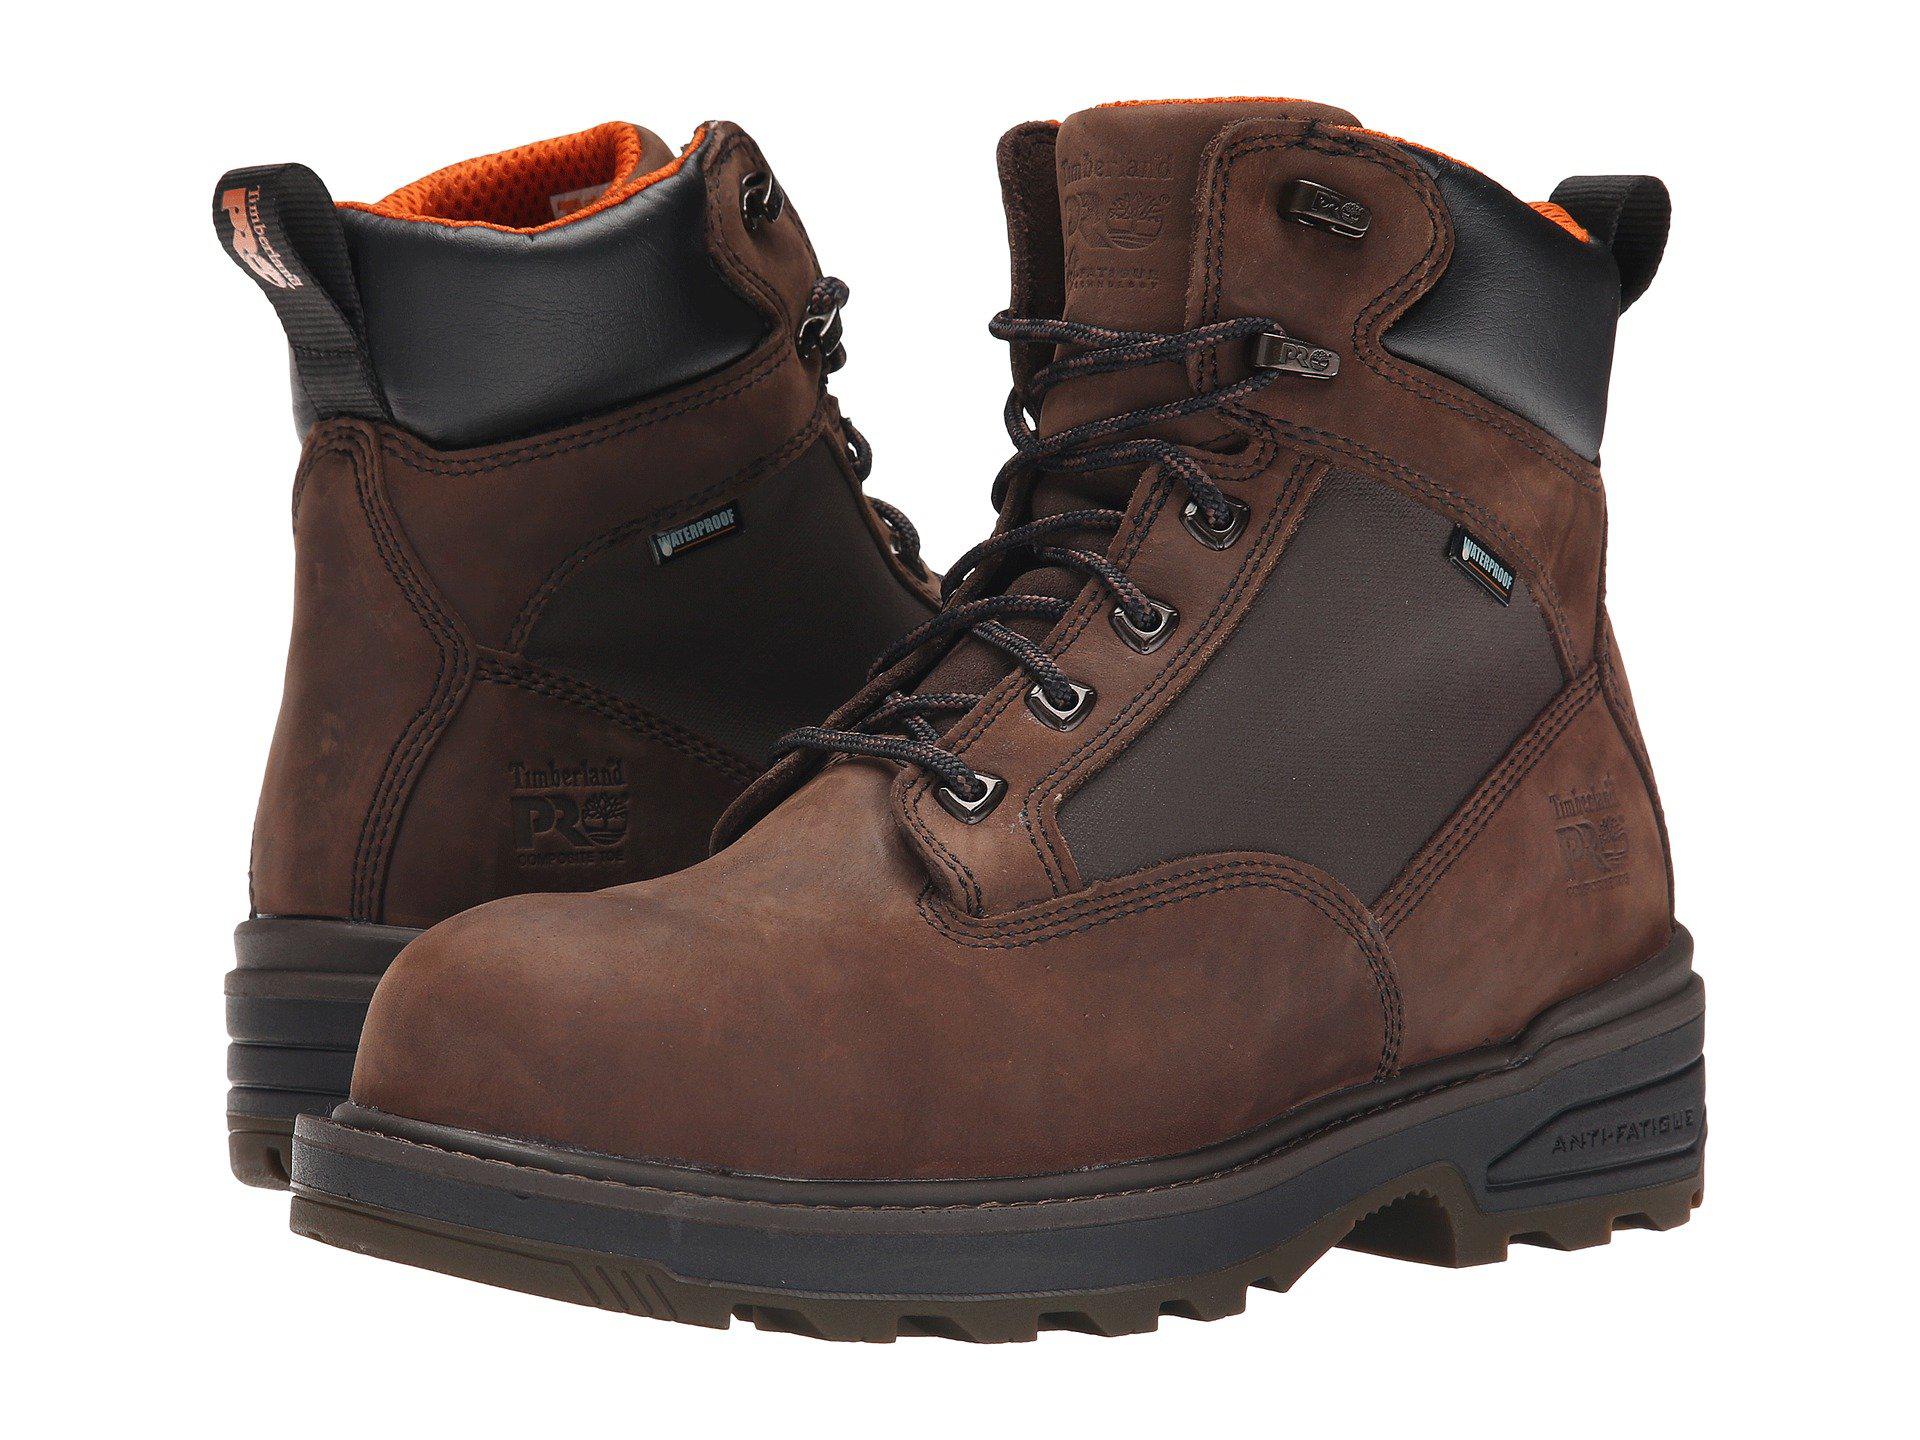 Lyst - Timberland 6 Resistor Composite Safety Toe Waterproof Boot ...